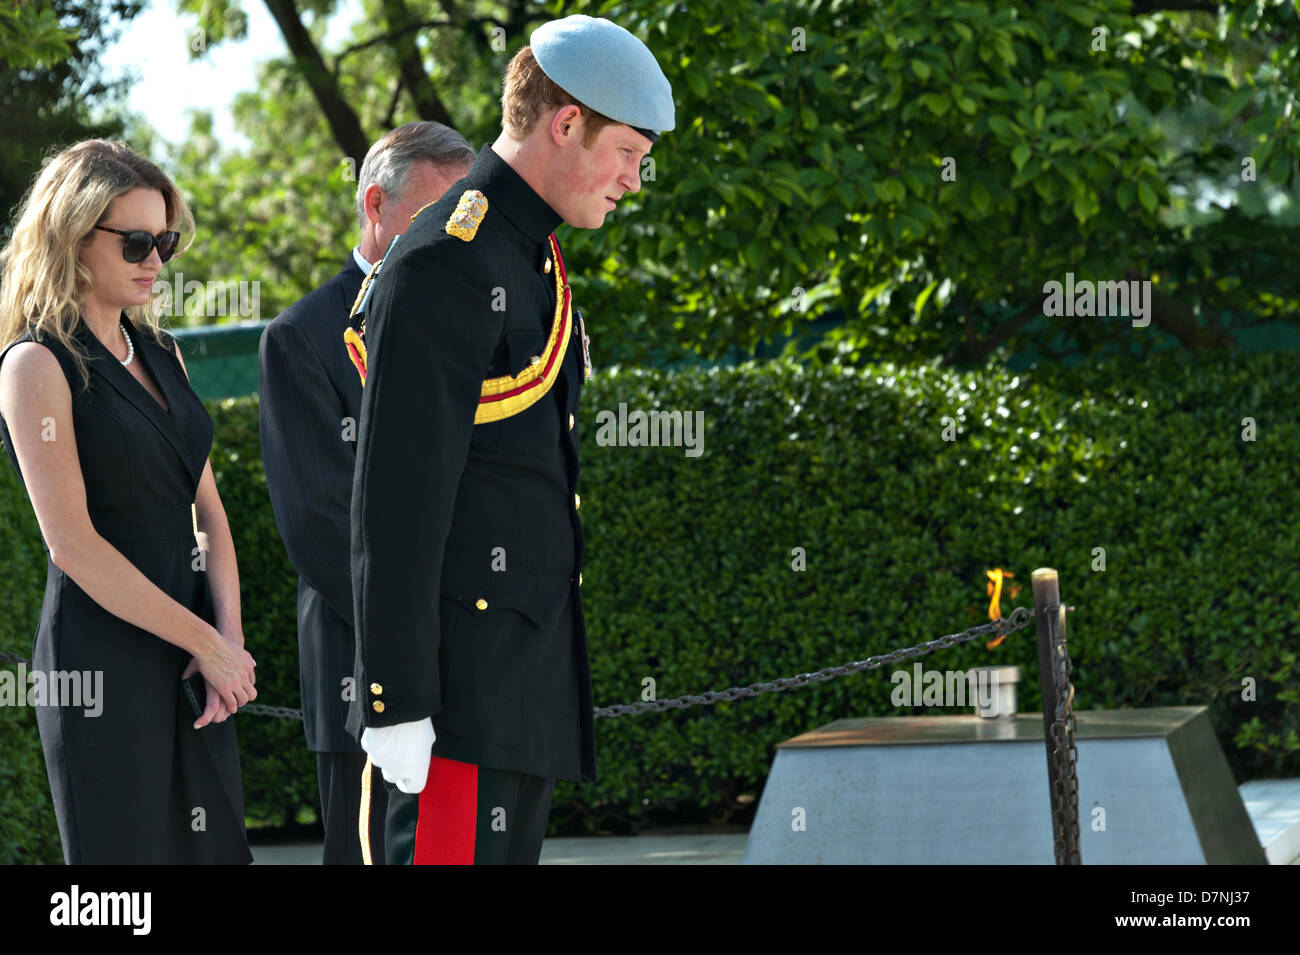 HRH Prince Harry of Wales places flowers at President John F. Kennedy's gravesite at Arlington National Cemetery May 10, 2013 in Arlington, VA. Stock Photo